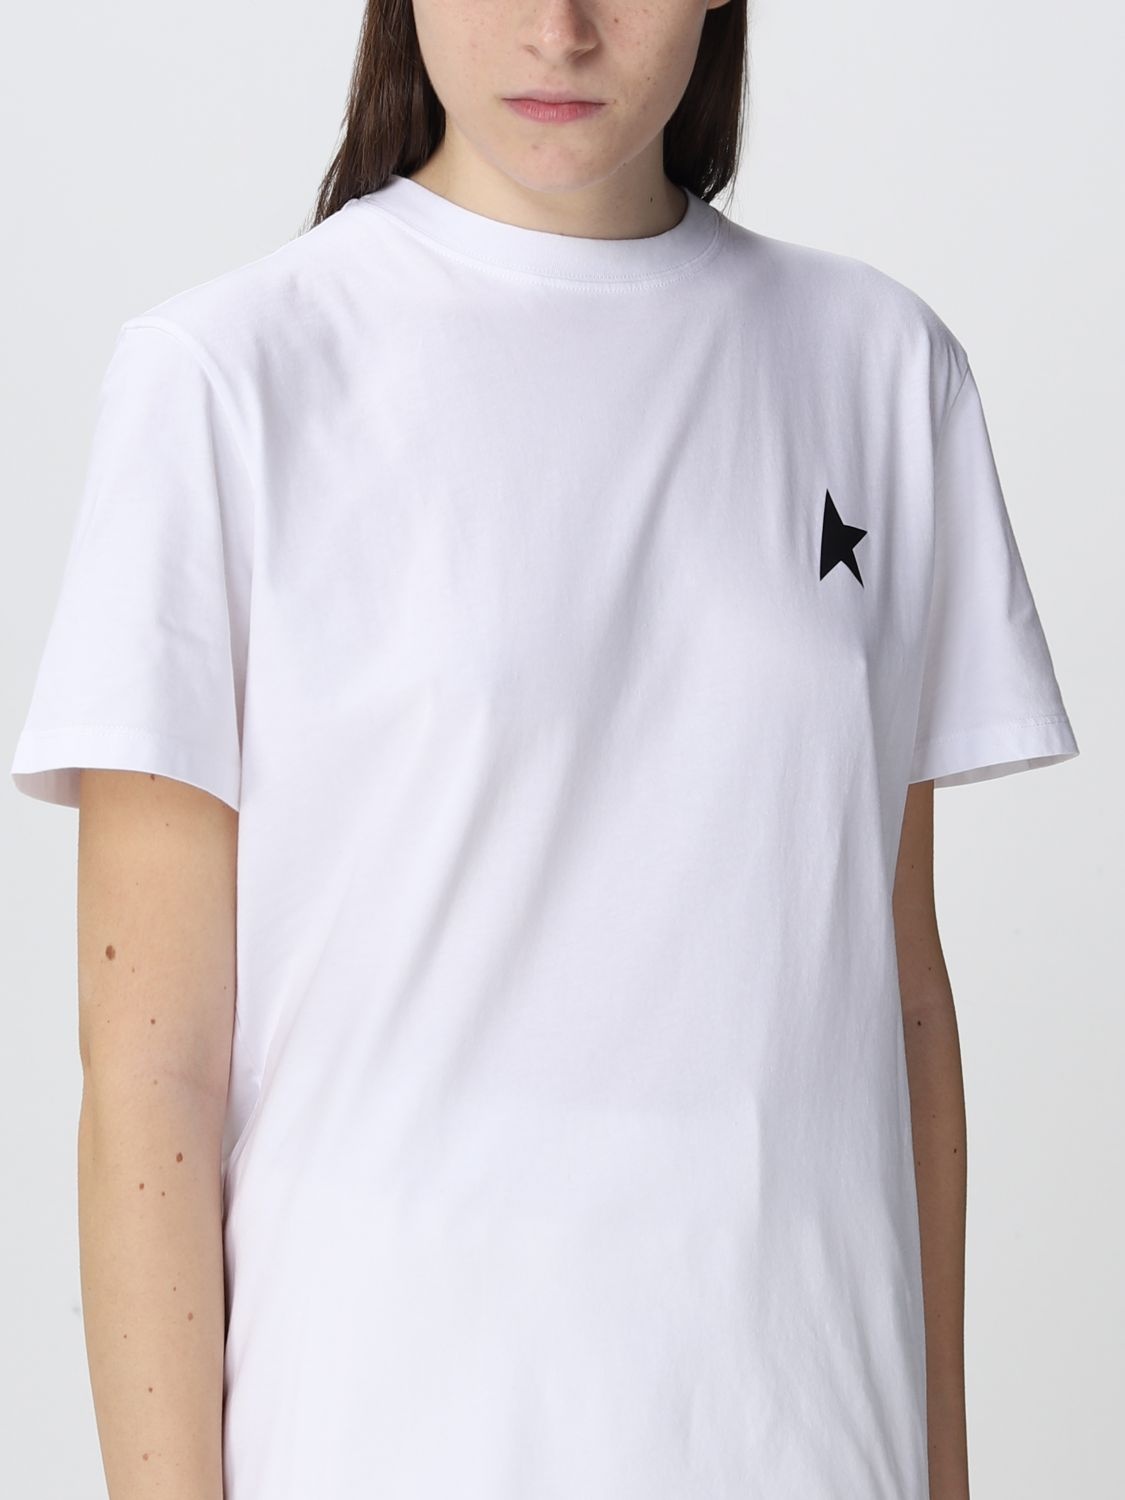 Golden Goose T-shirt in jersey with Star logo - 5